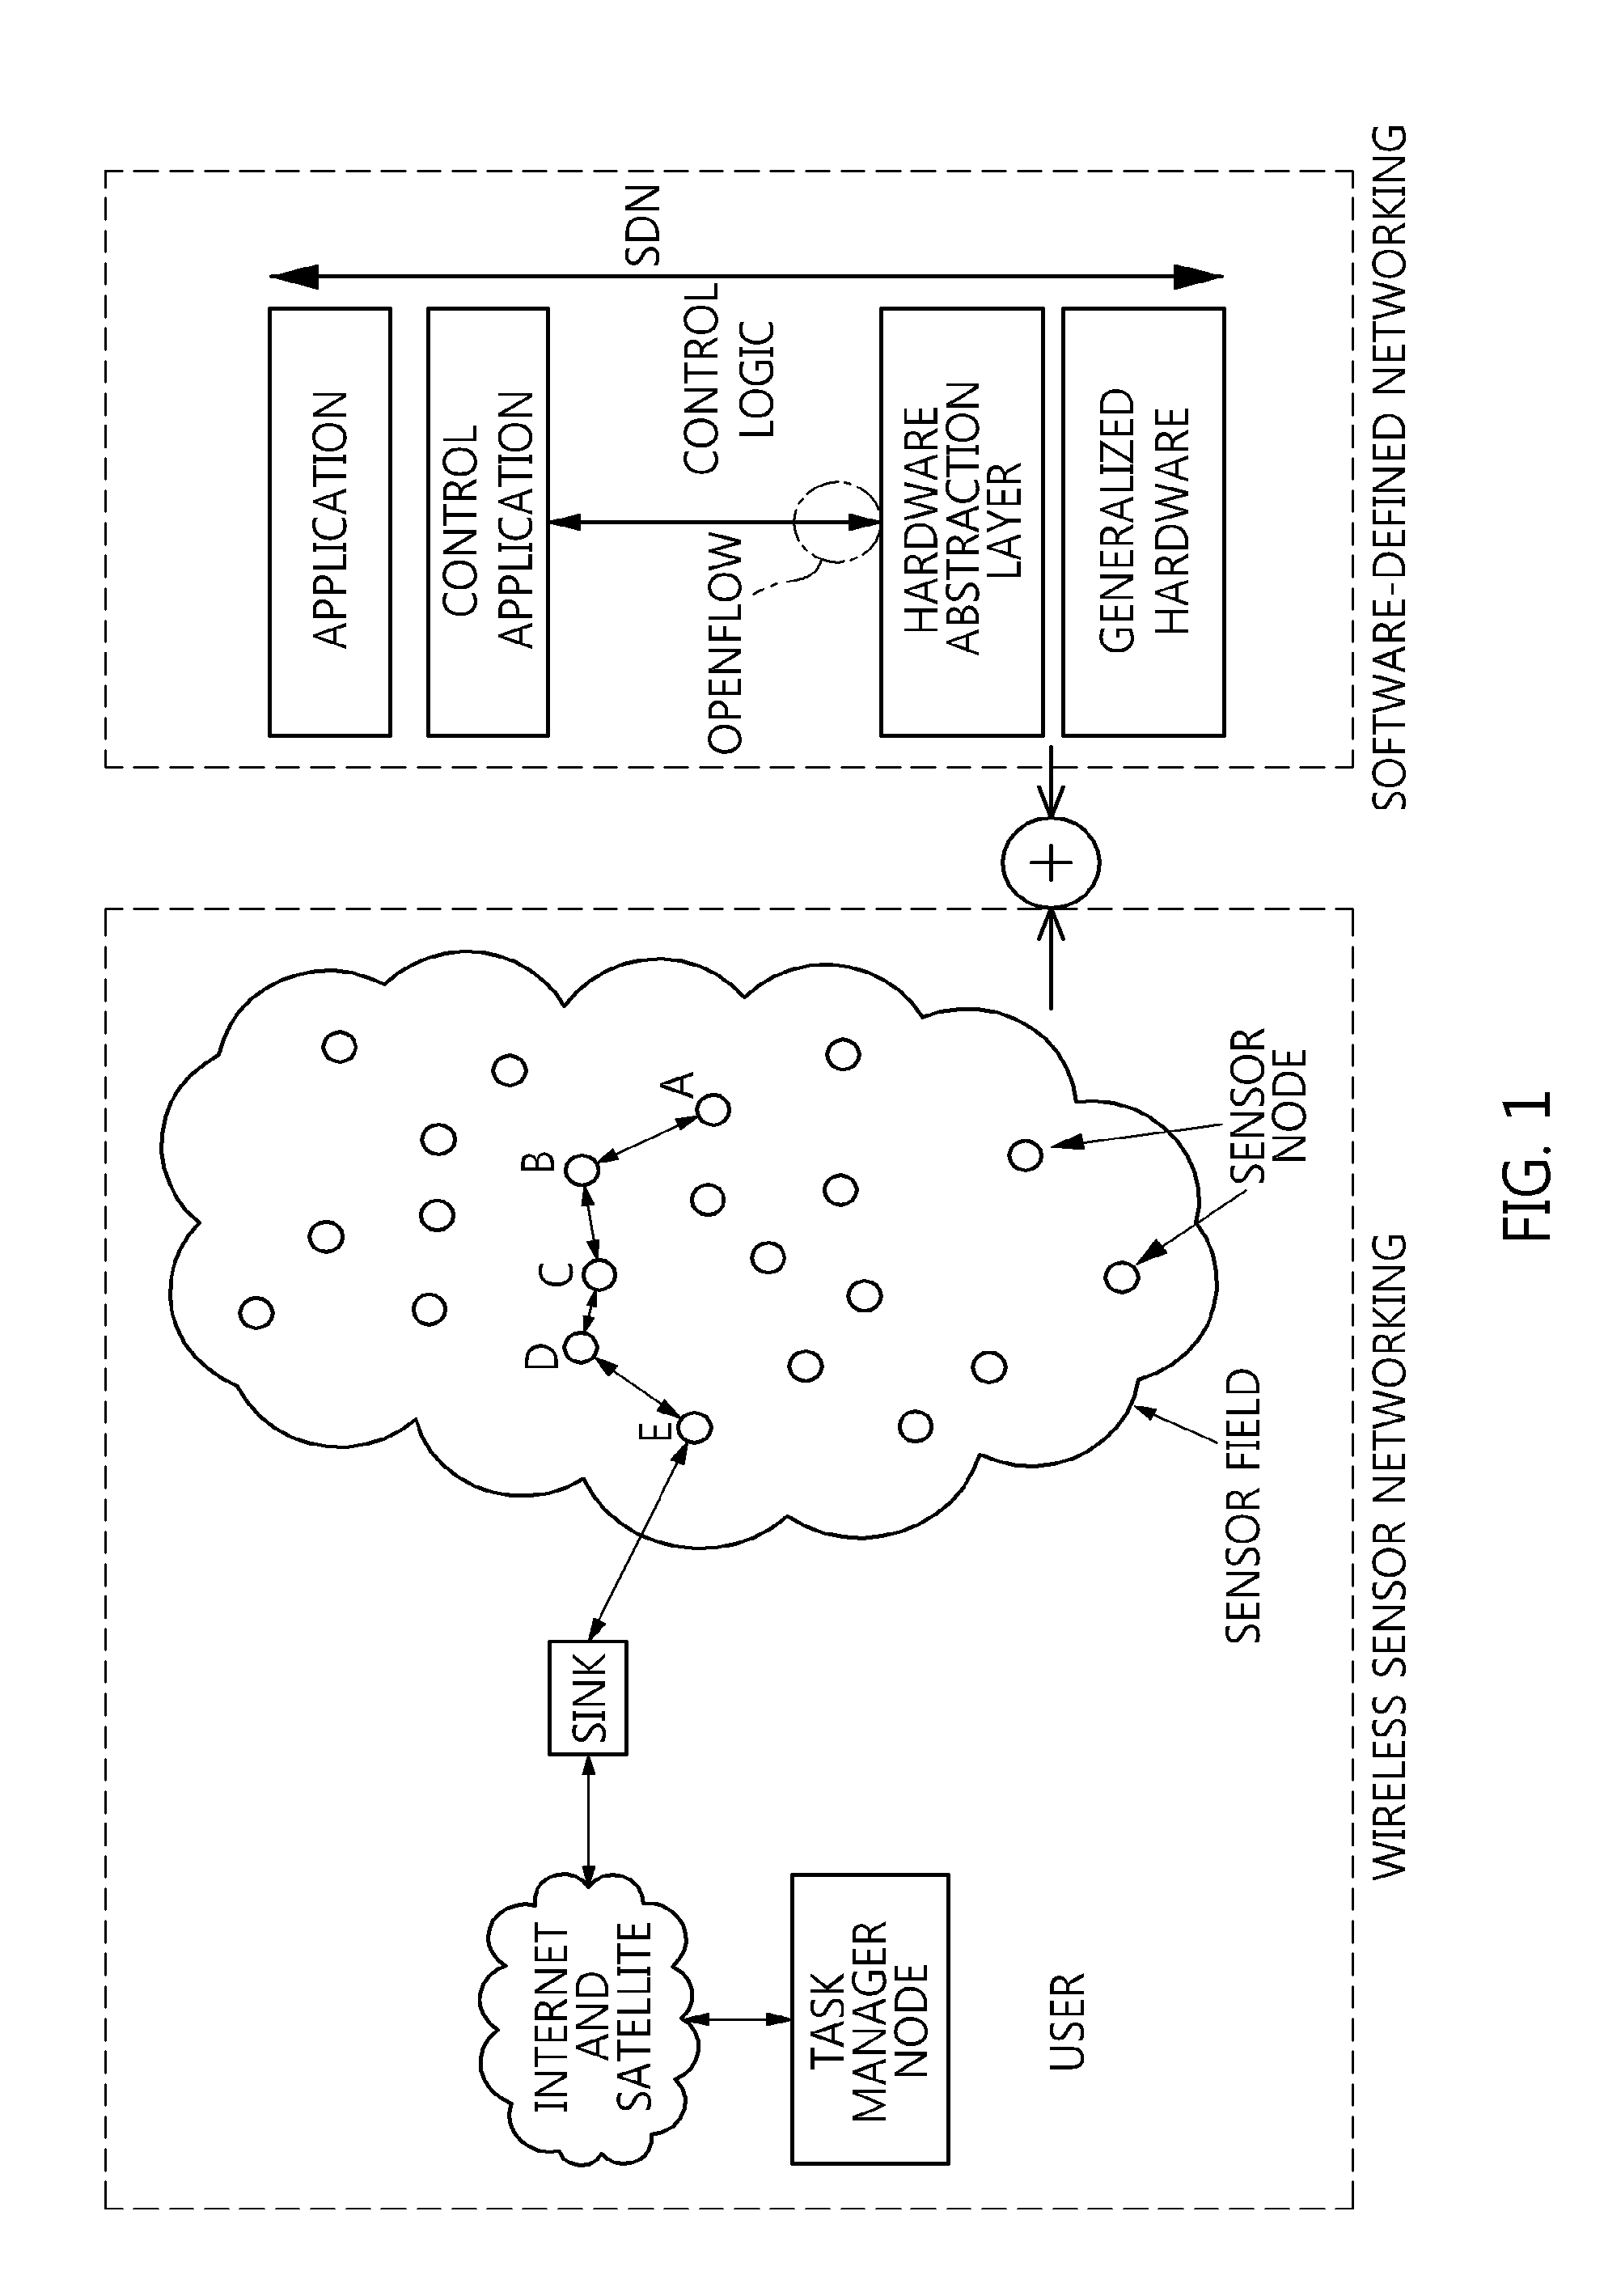 Programmable sensor networking apparatus and sensor networking service method using the same